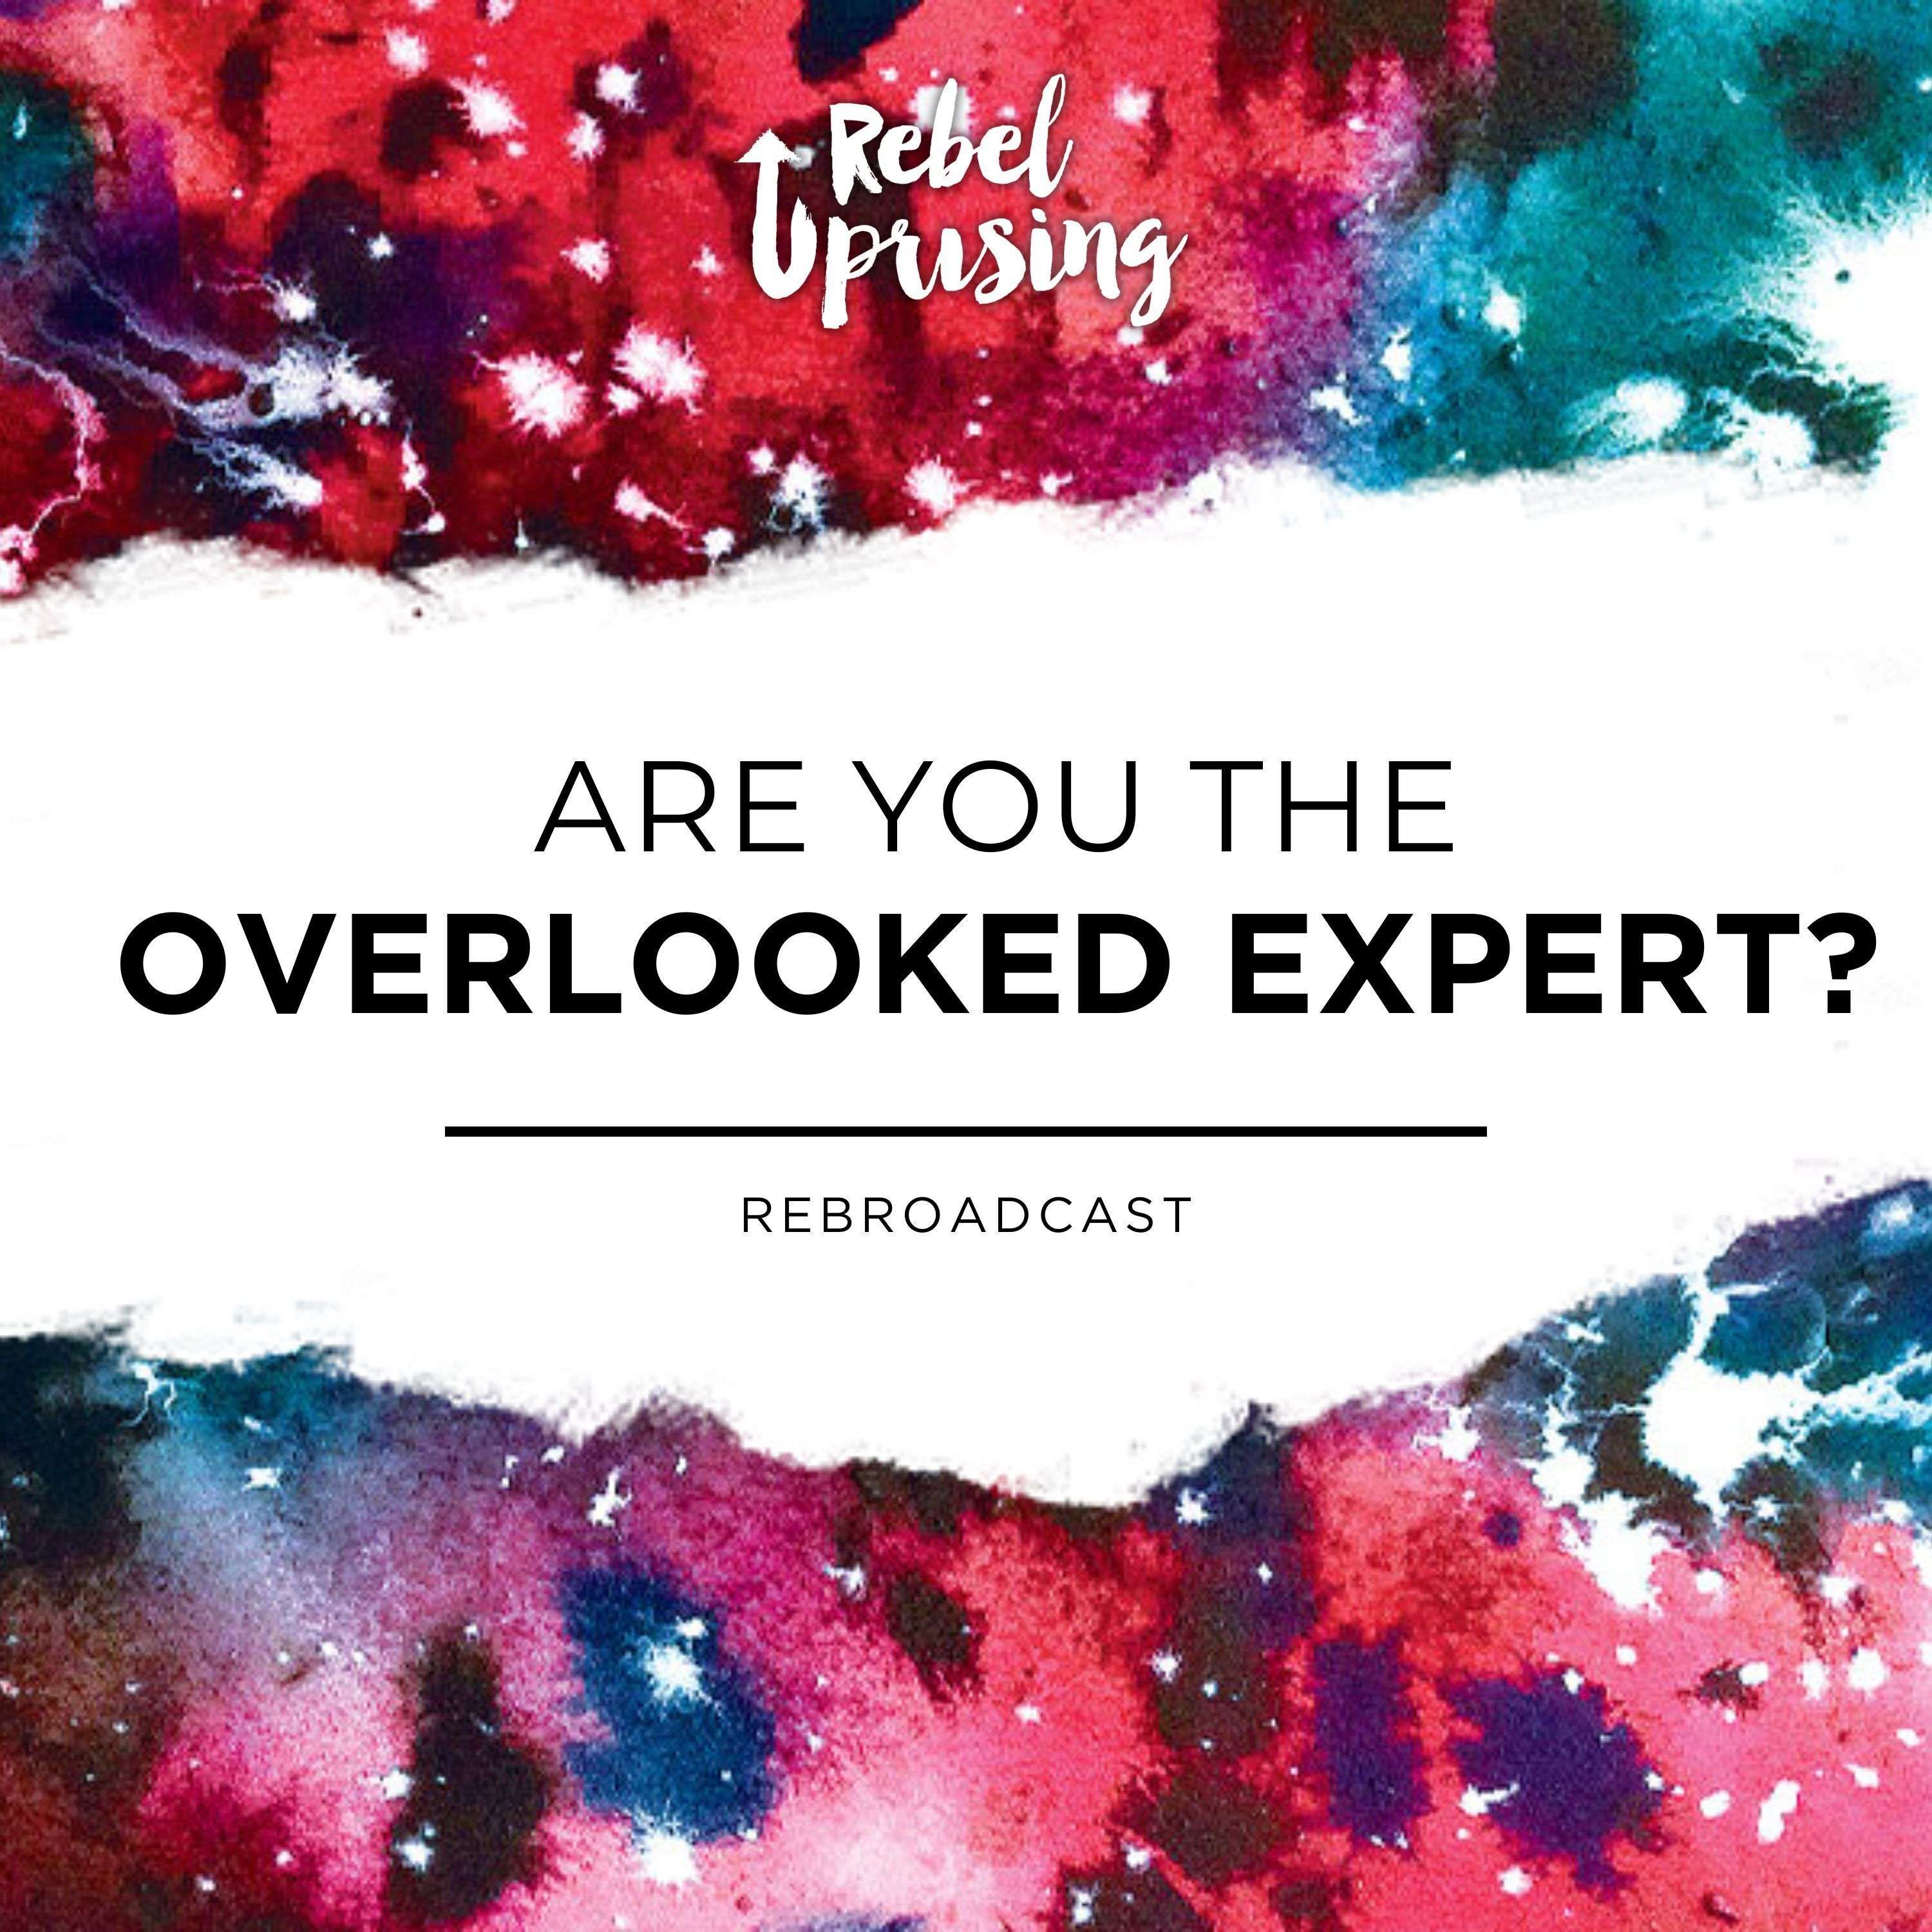 [Rebroadcast] Are You the Overlooked Expert?